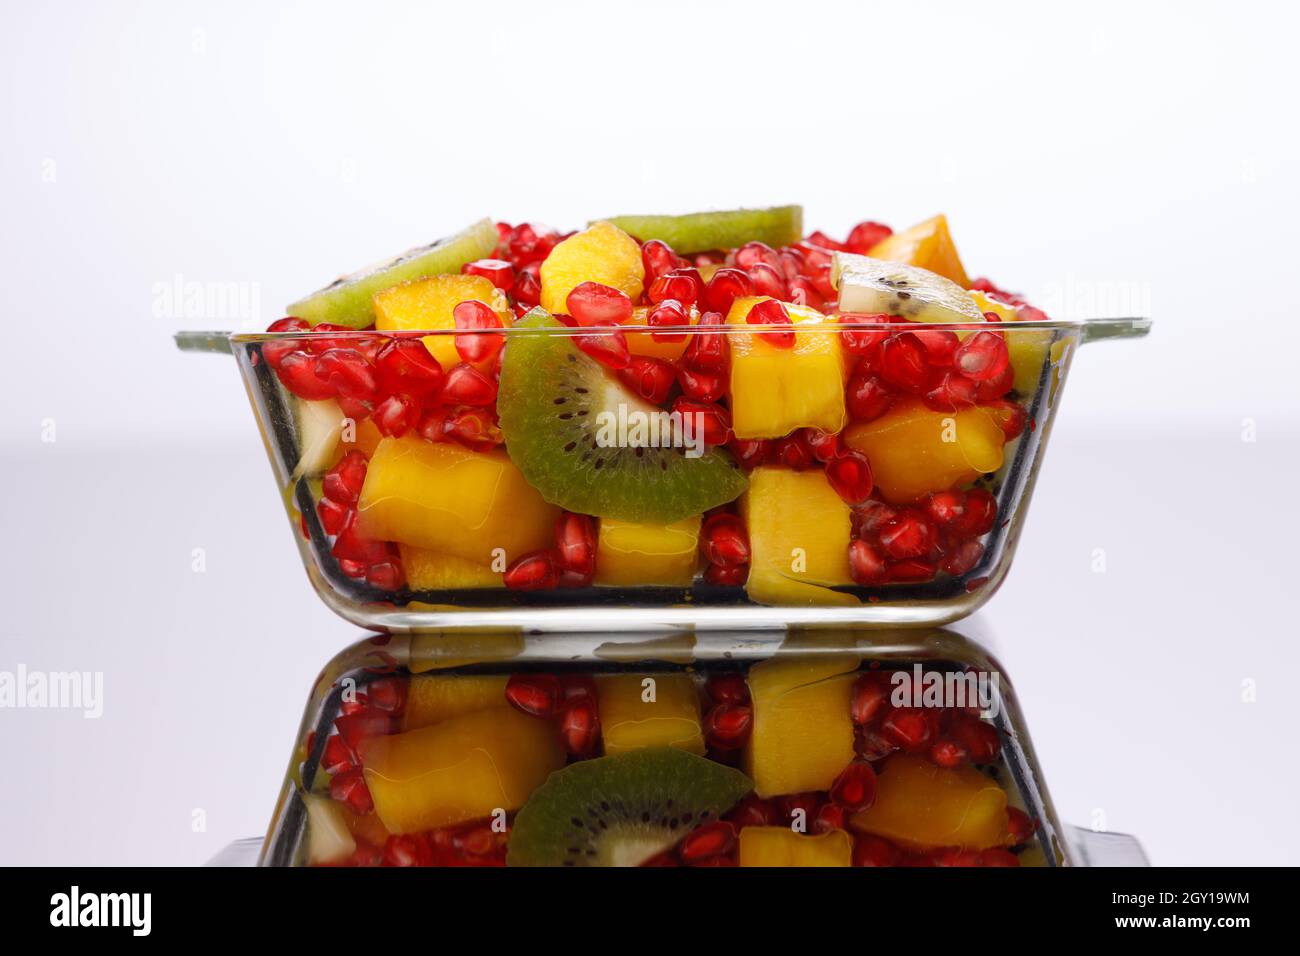 Mixed cut fruits arranged in a transparent glass bowl  with white background, isolated. Stock Photo